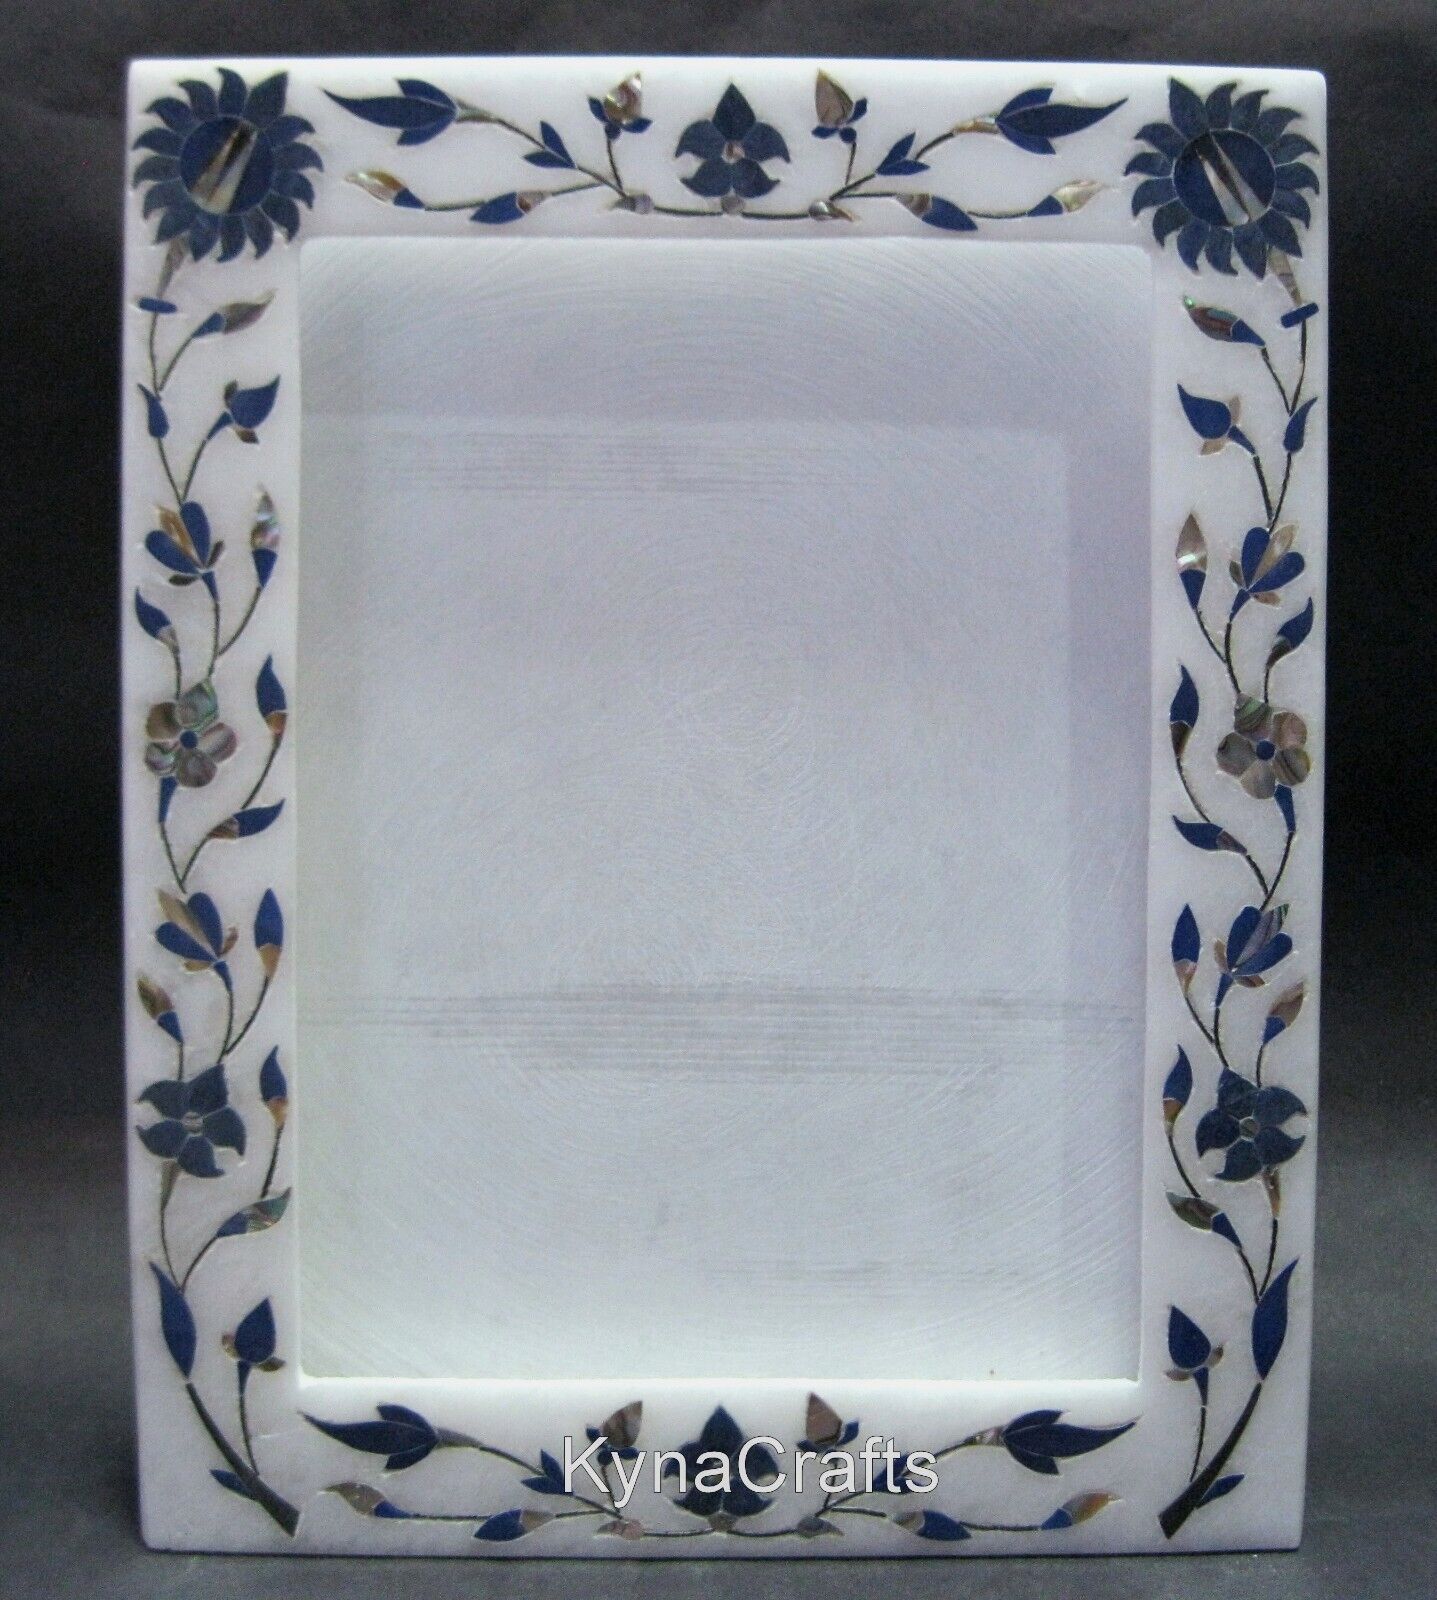 10 x 8 Inches White Marble Giftable Piece Floral Pattern Inlay Work Photo Frame